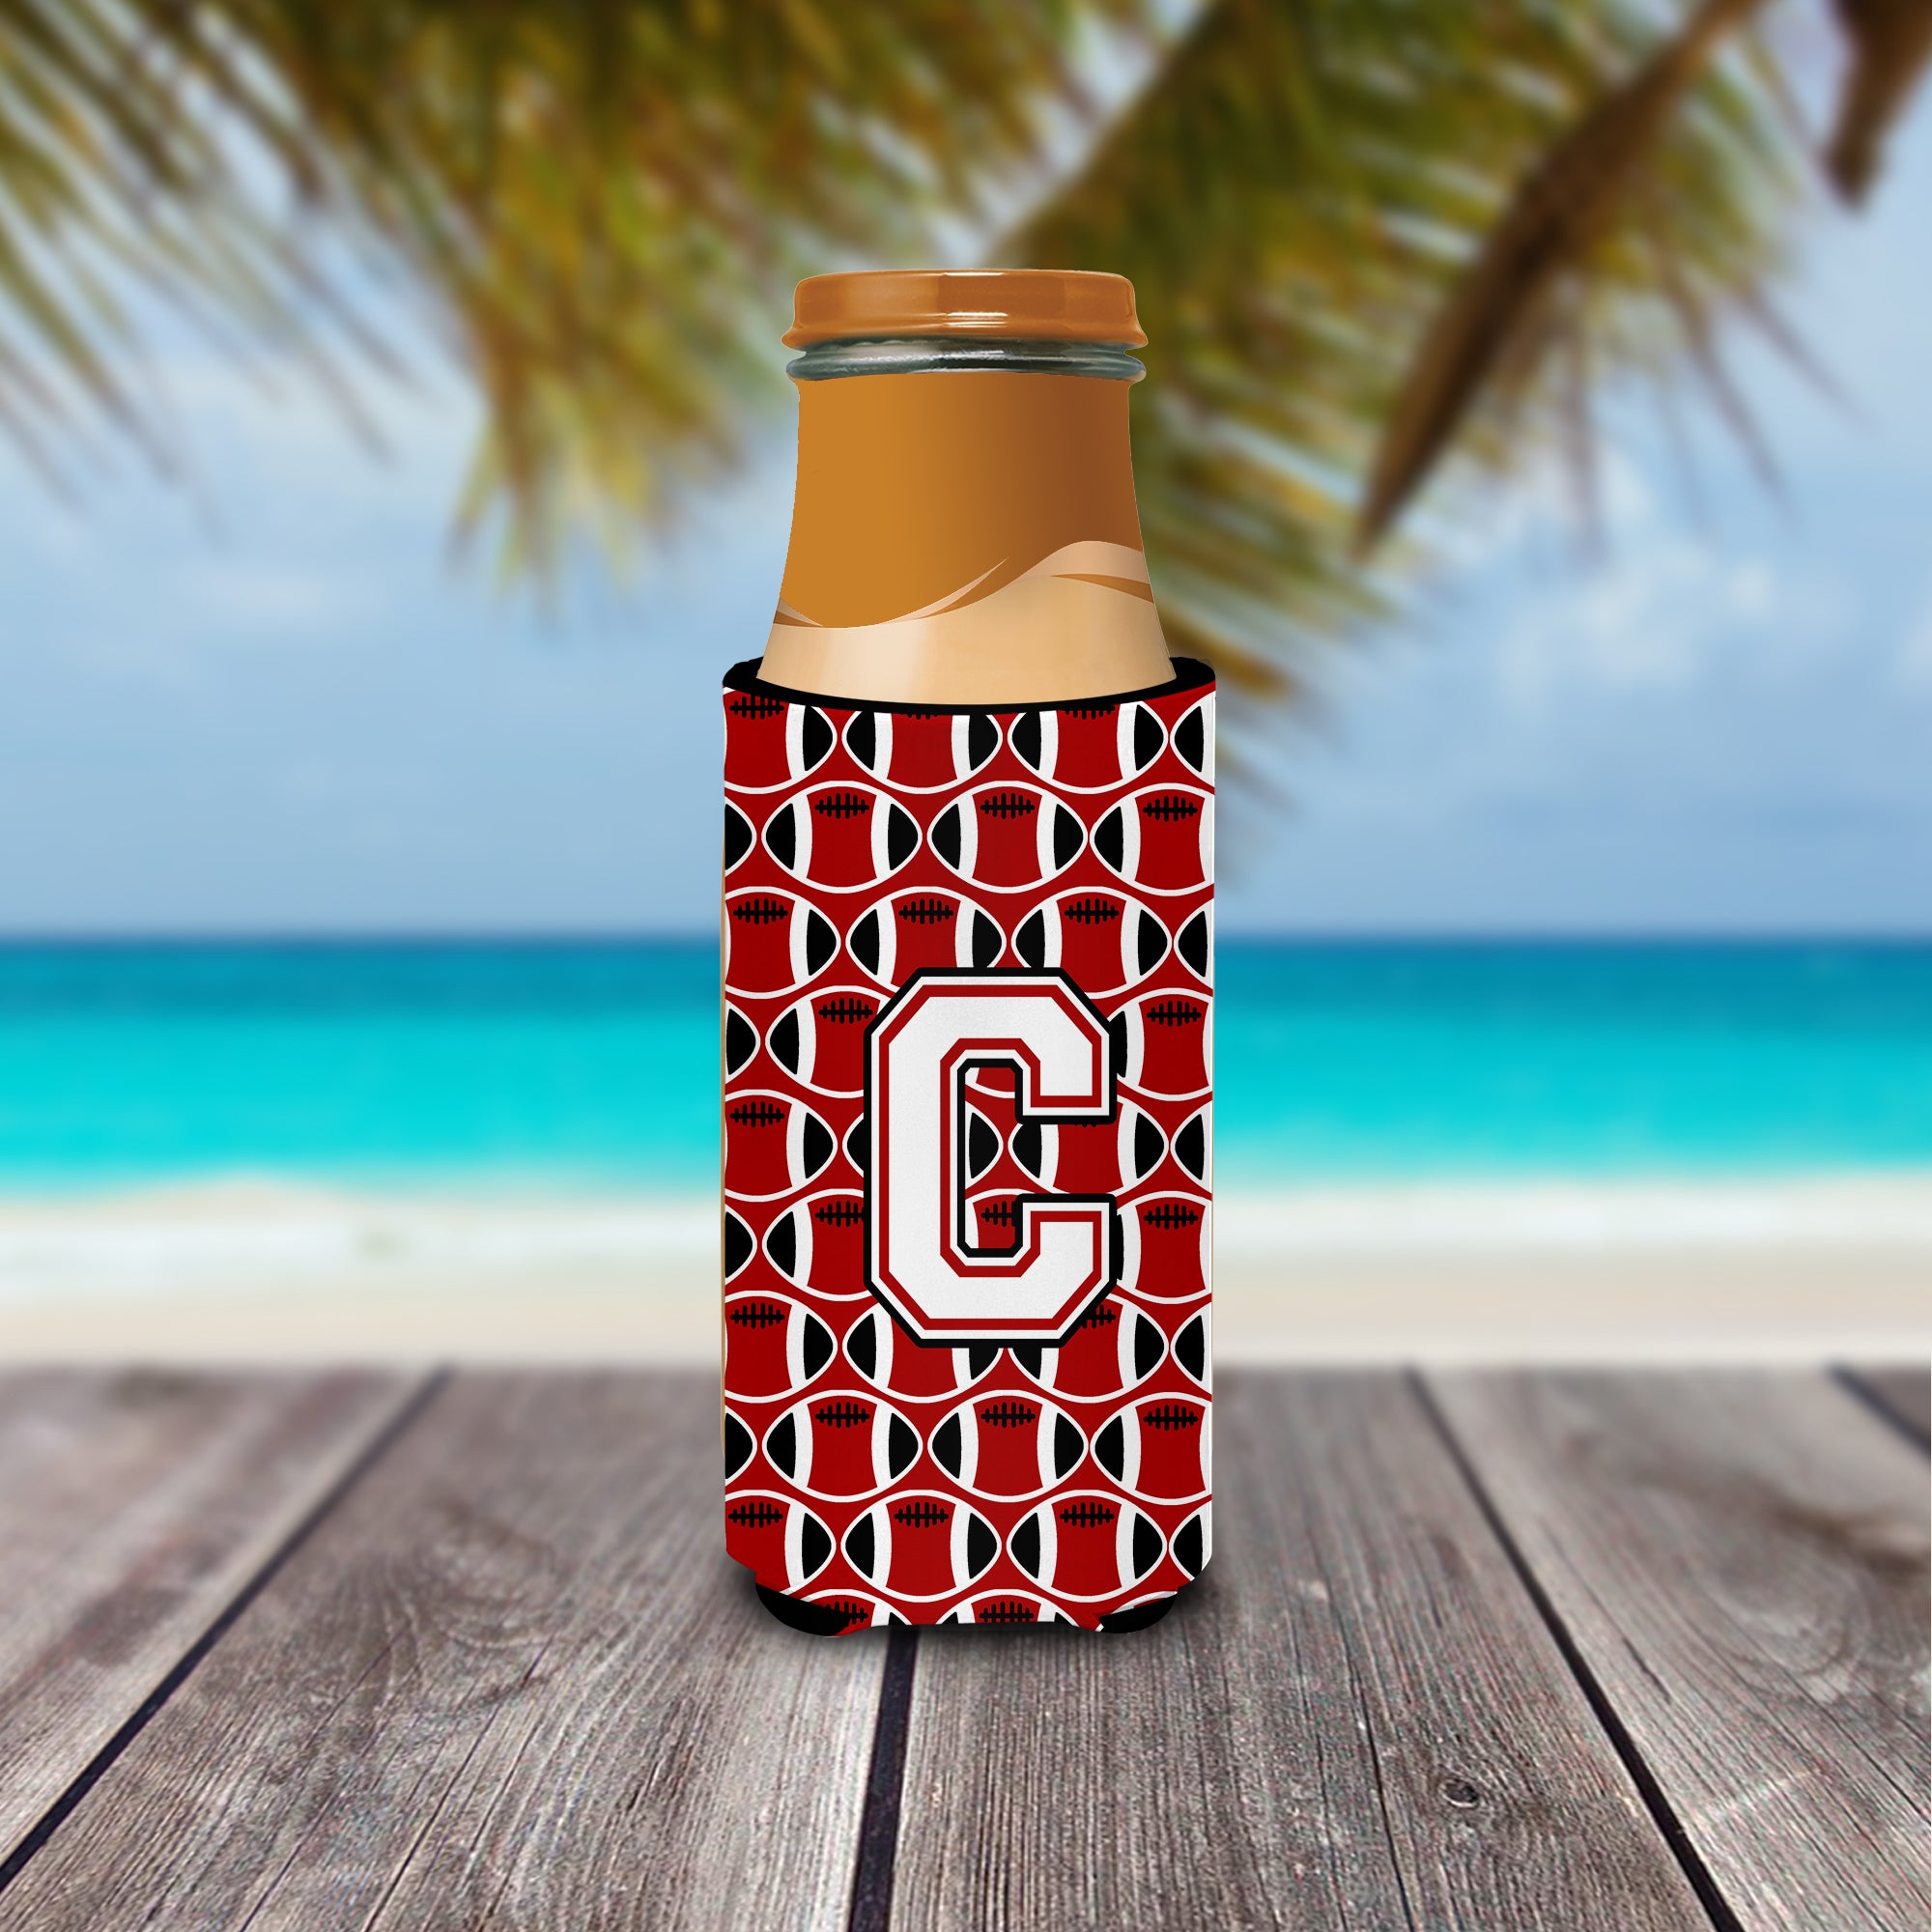 Letter C Football Cardinal and White Ultra Beverage Insulators for slim cans CJ1082-CMUK.